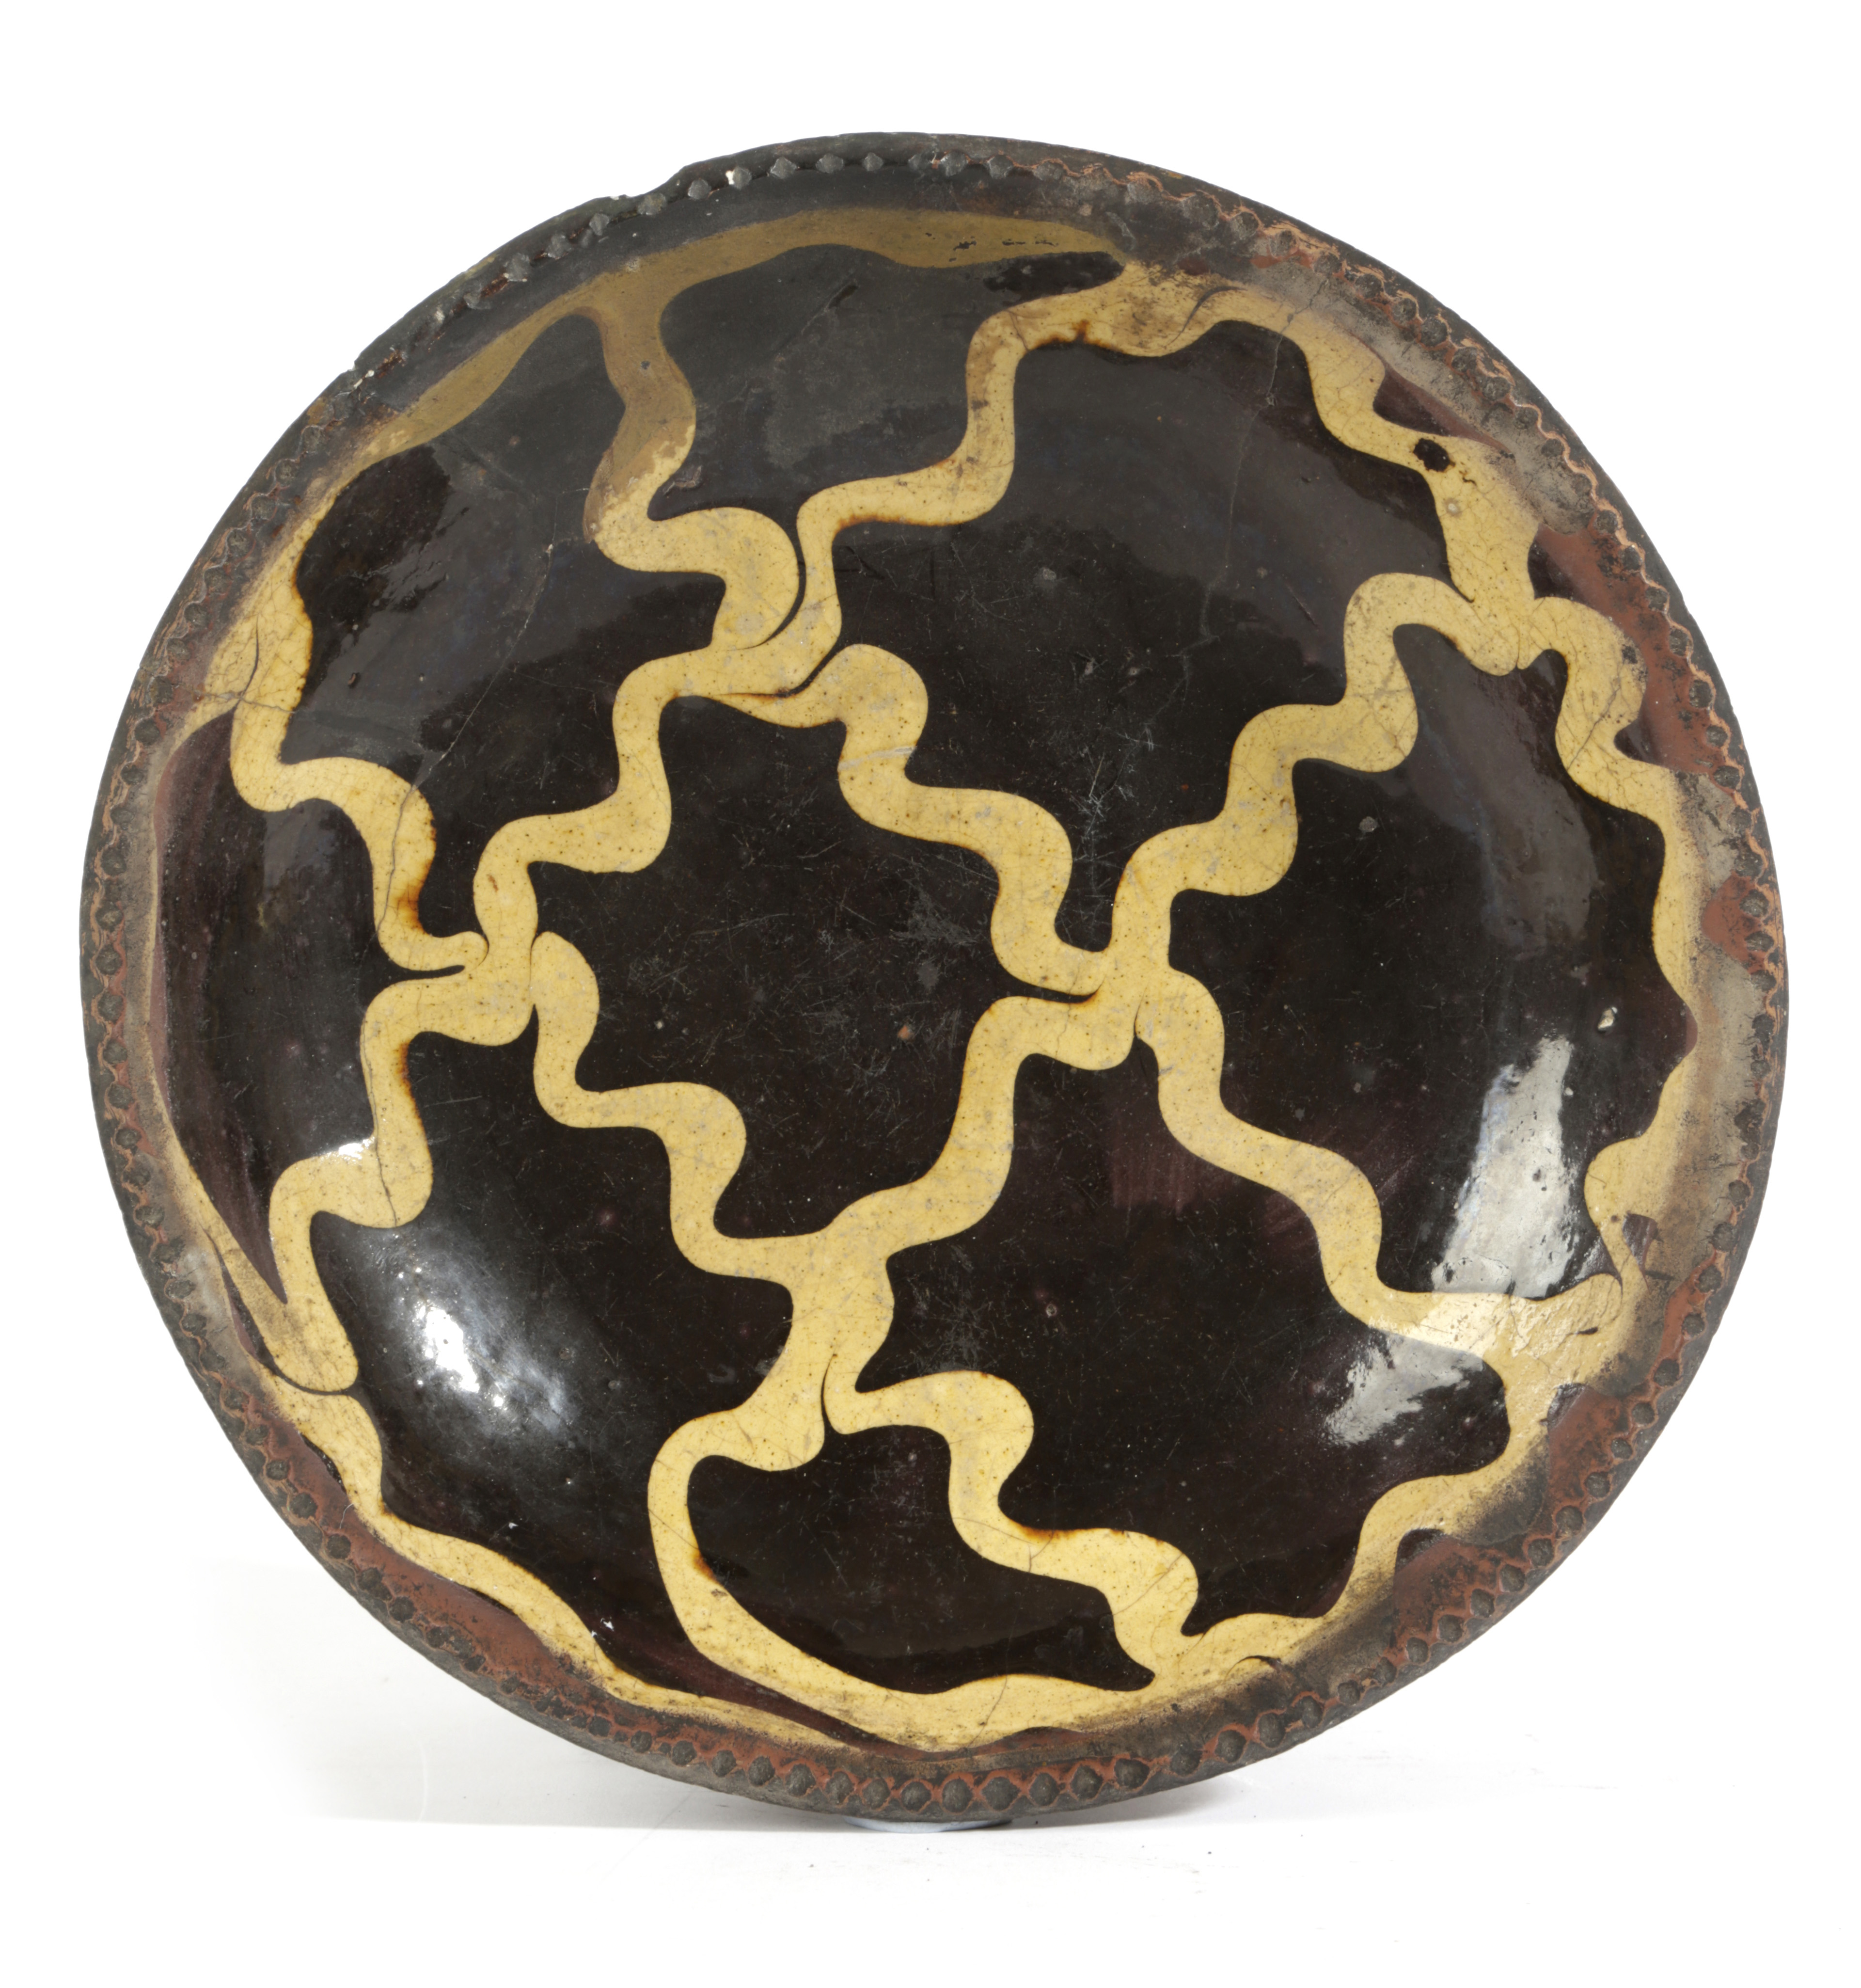 A STAFFORDSHIRE SLIPWARE POTTERY BOWL 18TH CENTURY with a crimped rim and decorated with a lattice